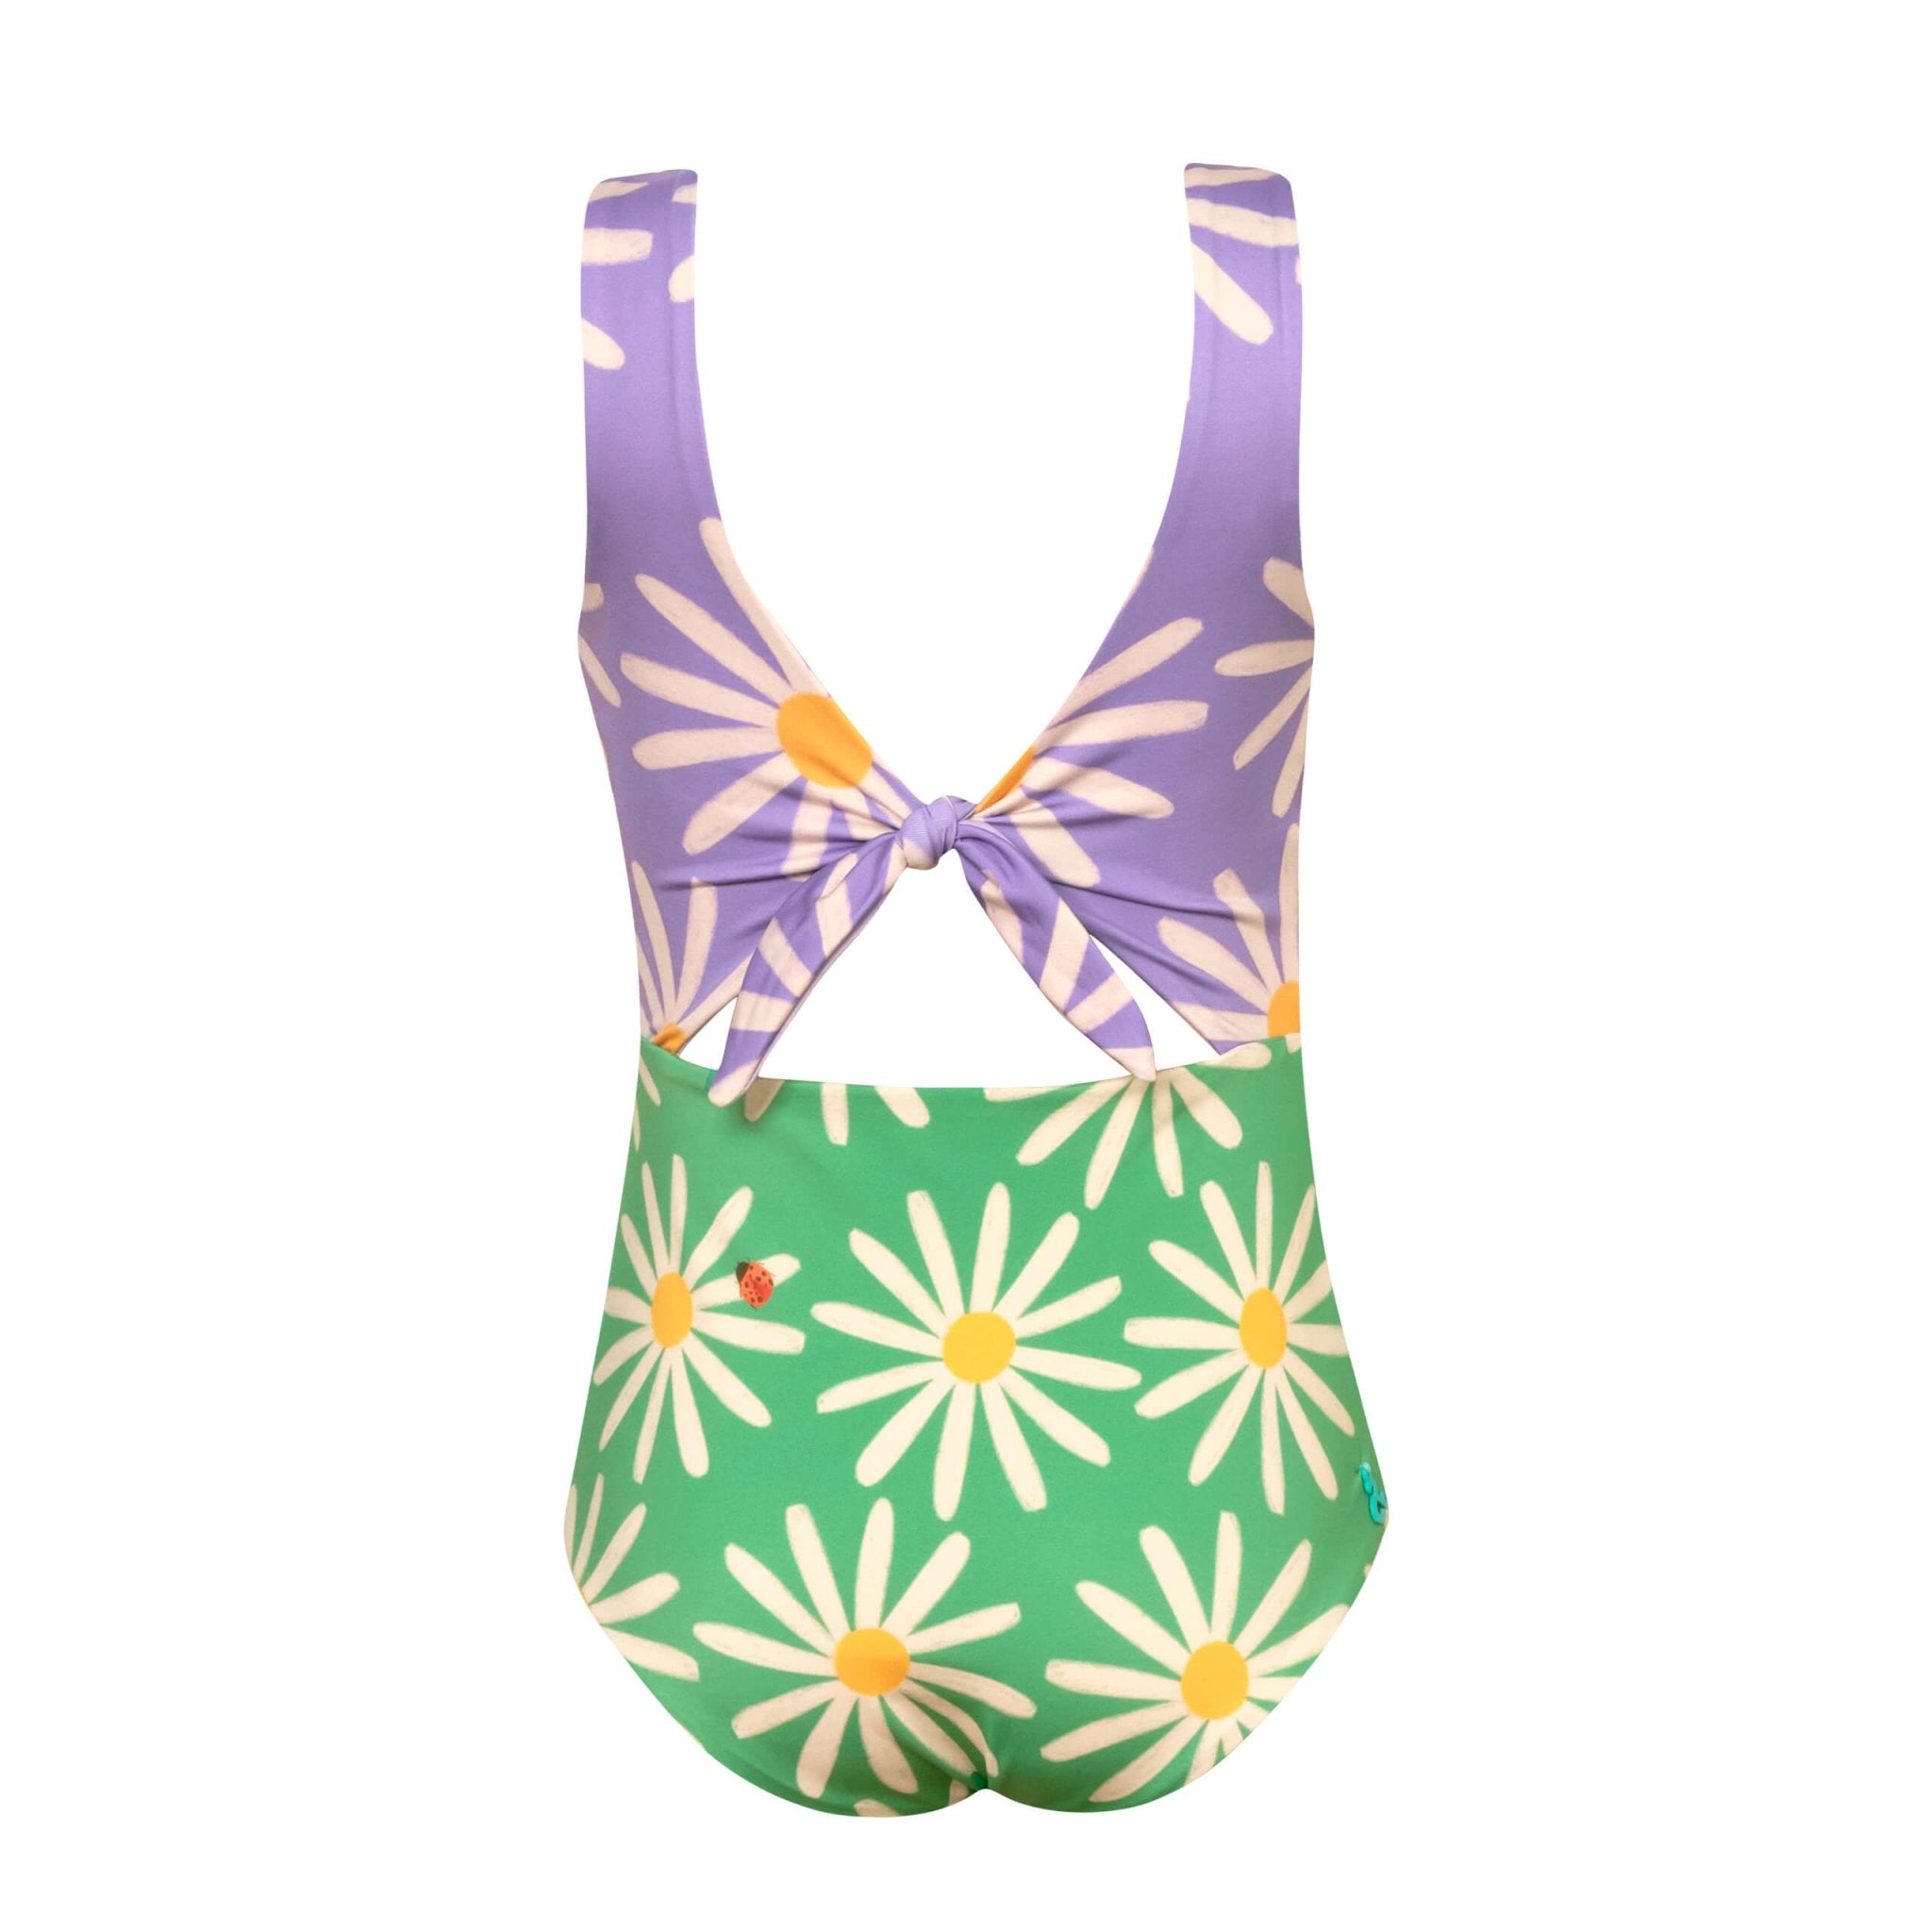 Cute little girls one piece bikini. Half purple and half green with cute flower and ladybug pattern all over. The swimsuit has a deep back v neck with a cutout and tie. 